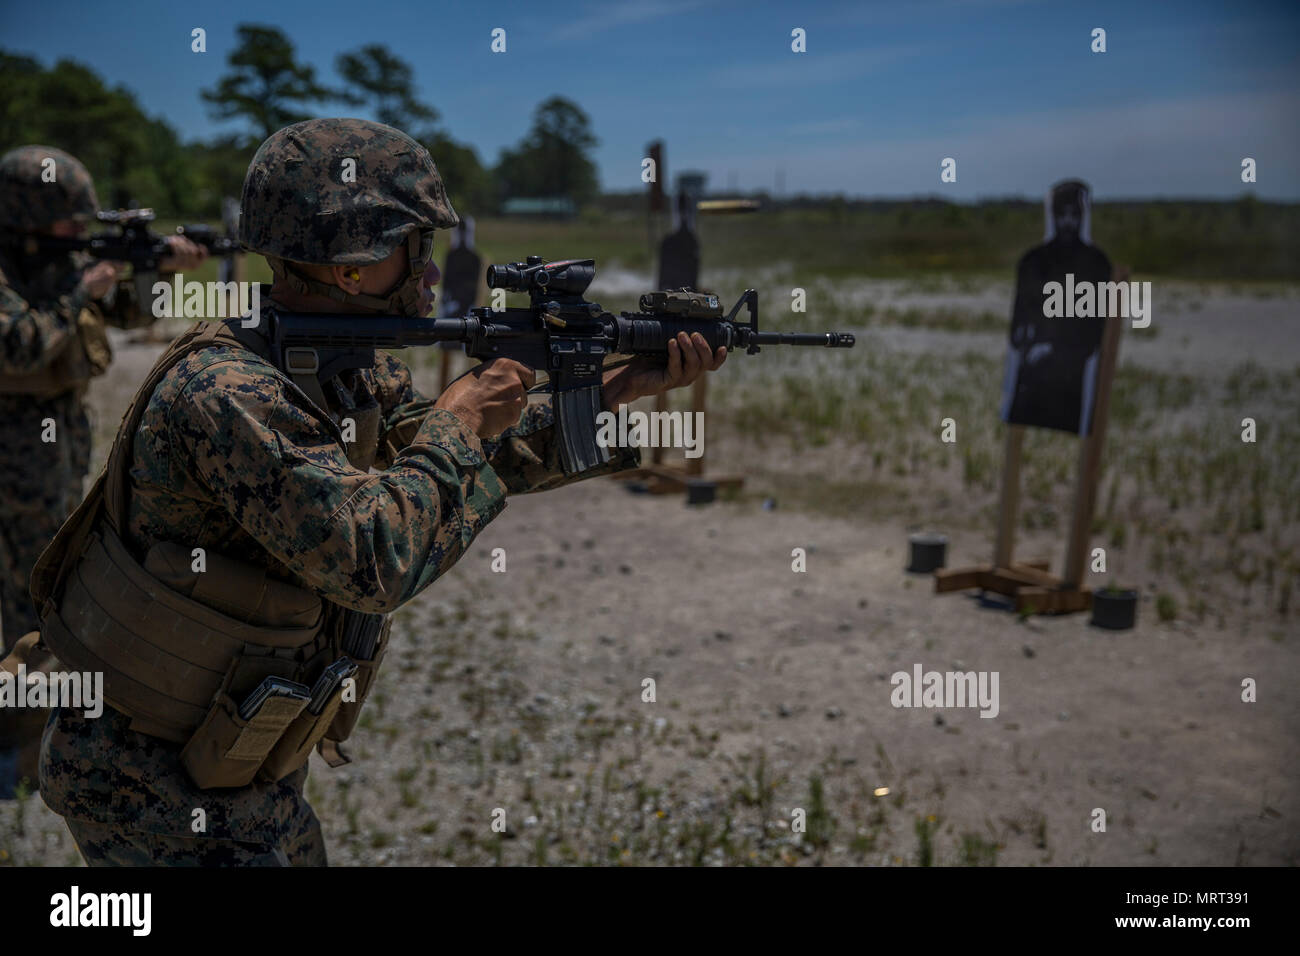 A Marine performs a hammer pair drill, rapidly shooting the target twice at  Camp Lejeune, N.C., June 28, 2017. The Marines conducted a combat  marksmanship program to enhance their capabilities as riflemen.